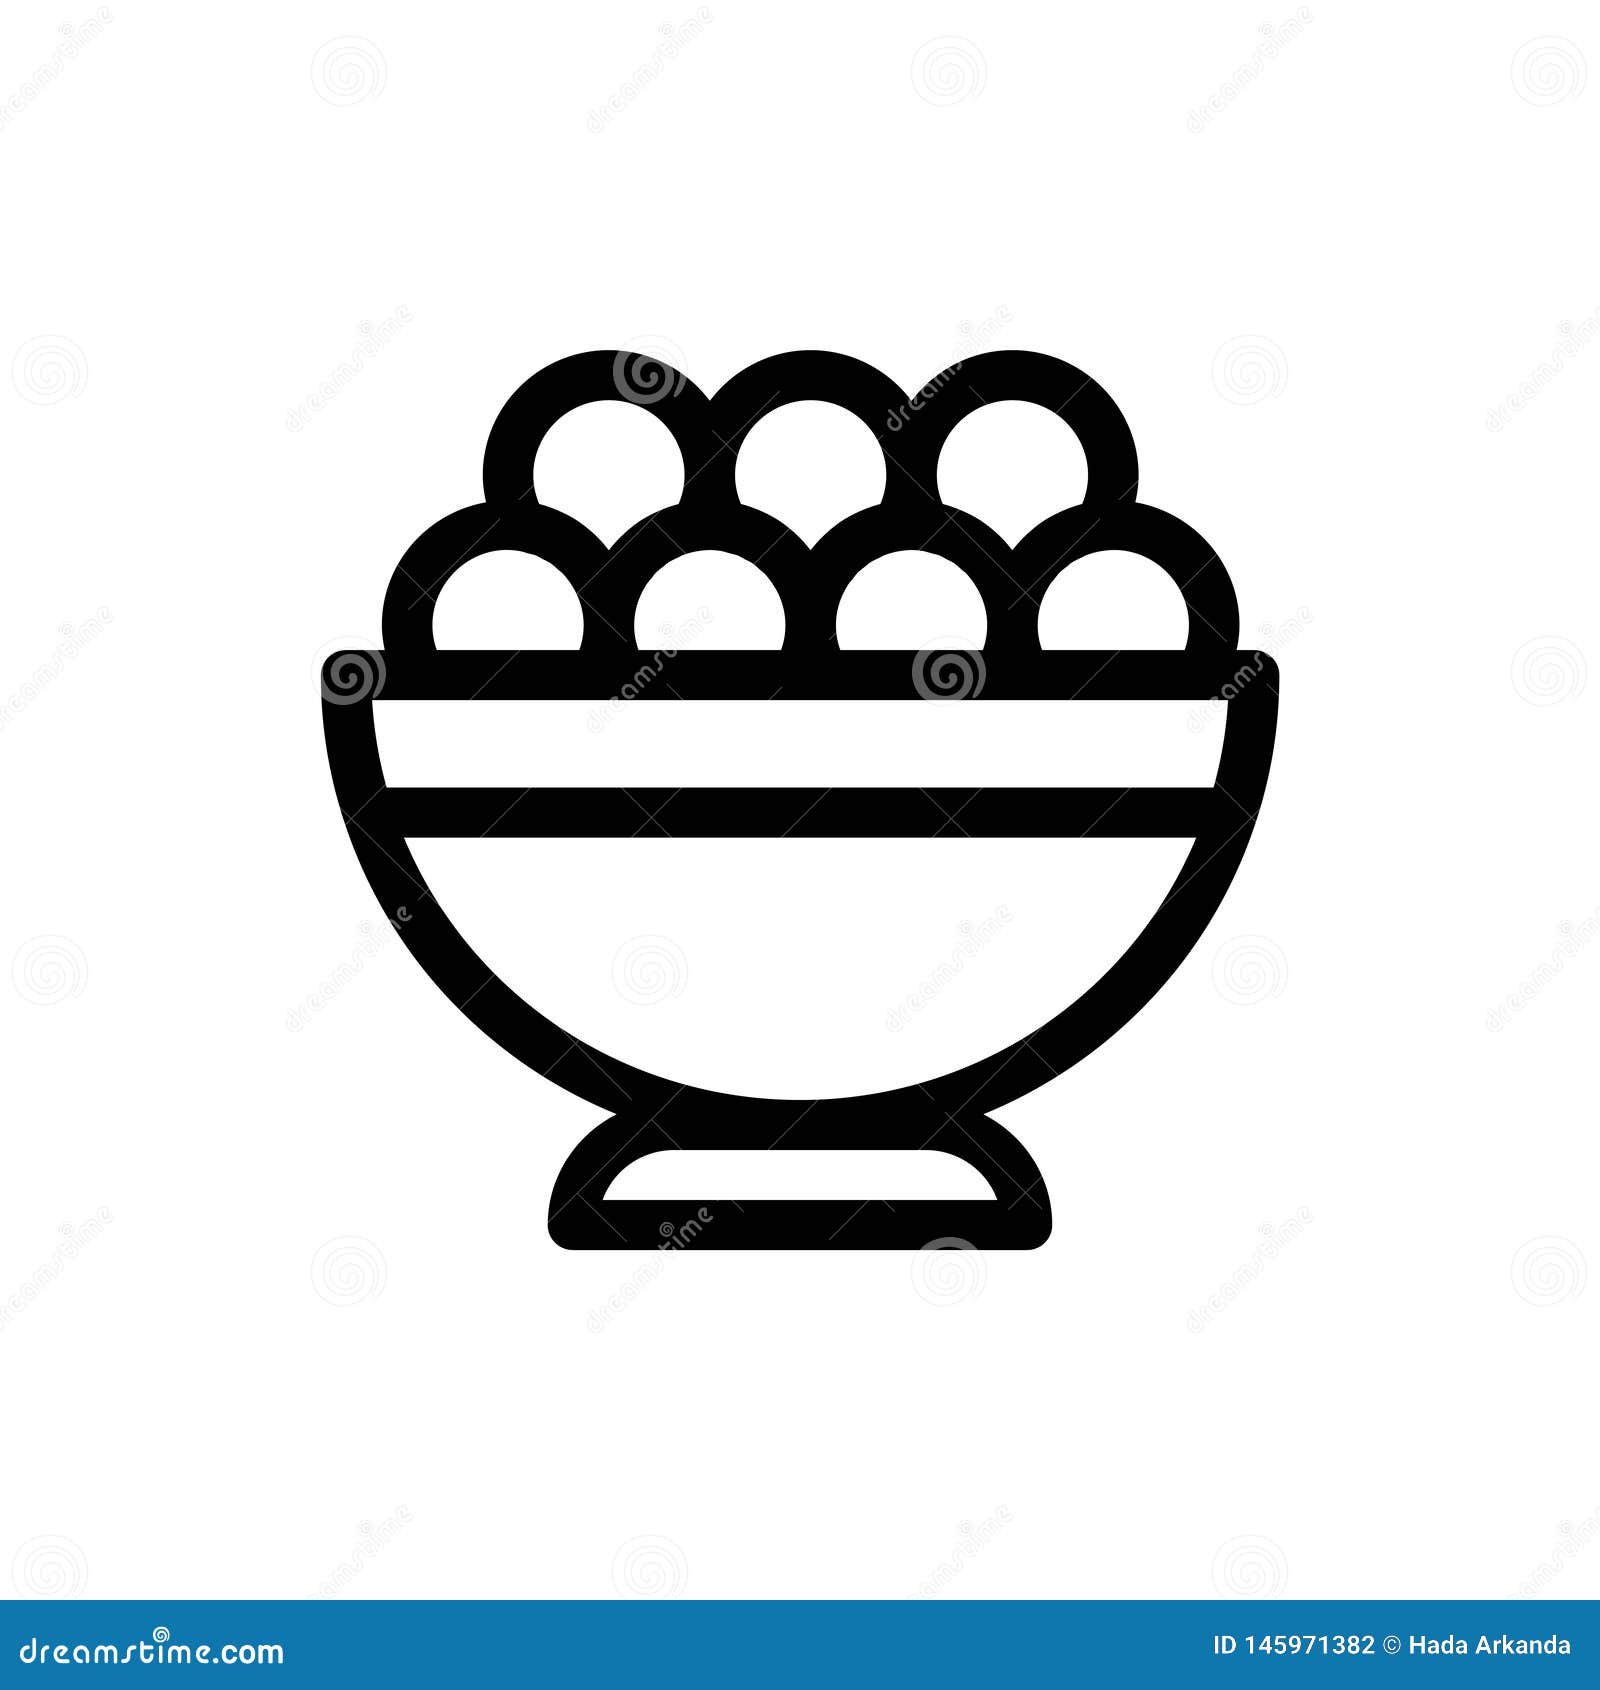 Ramadan Meal Food Fasting Islam Religion Culture Vector Line Icons ...